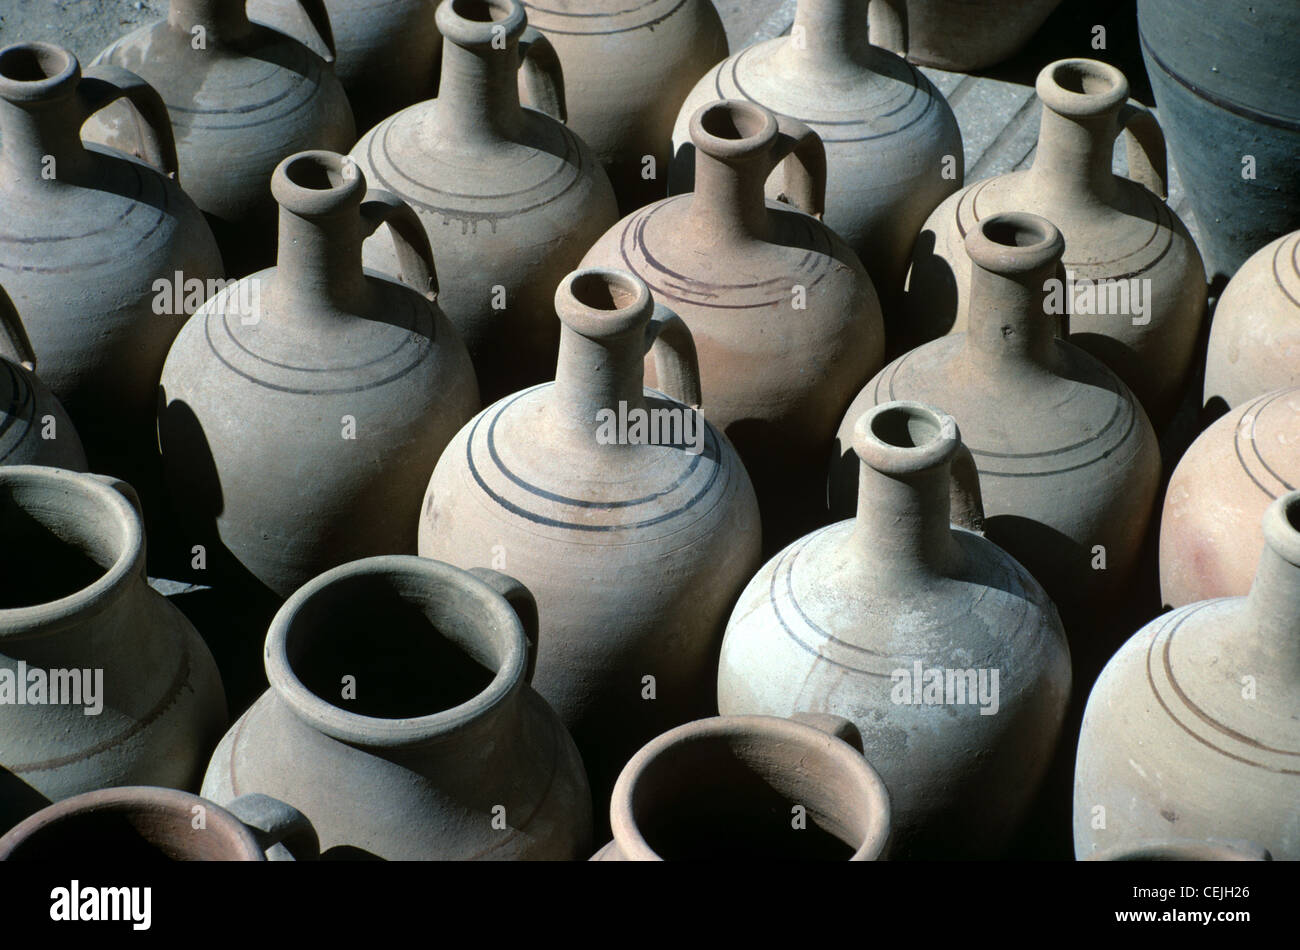 Display & Patterns of Terracotta or Earthenware Water Pots or Pottery at Avanos, Capadocia, Turkey Stock Photo